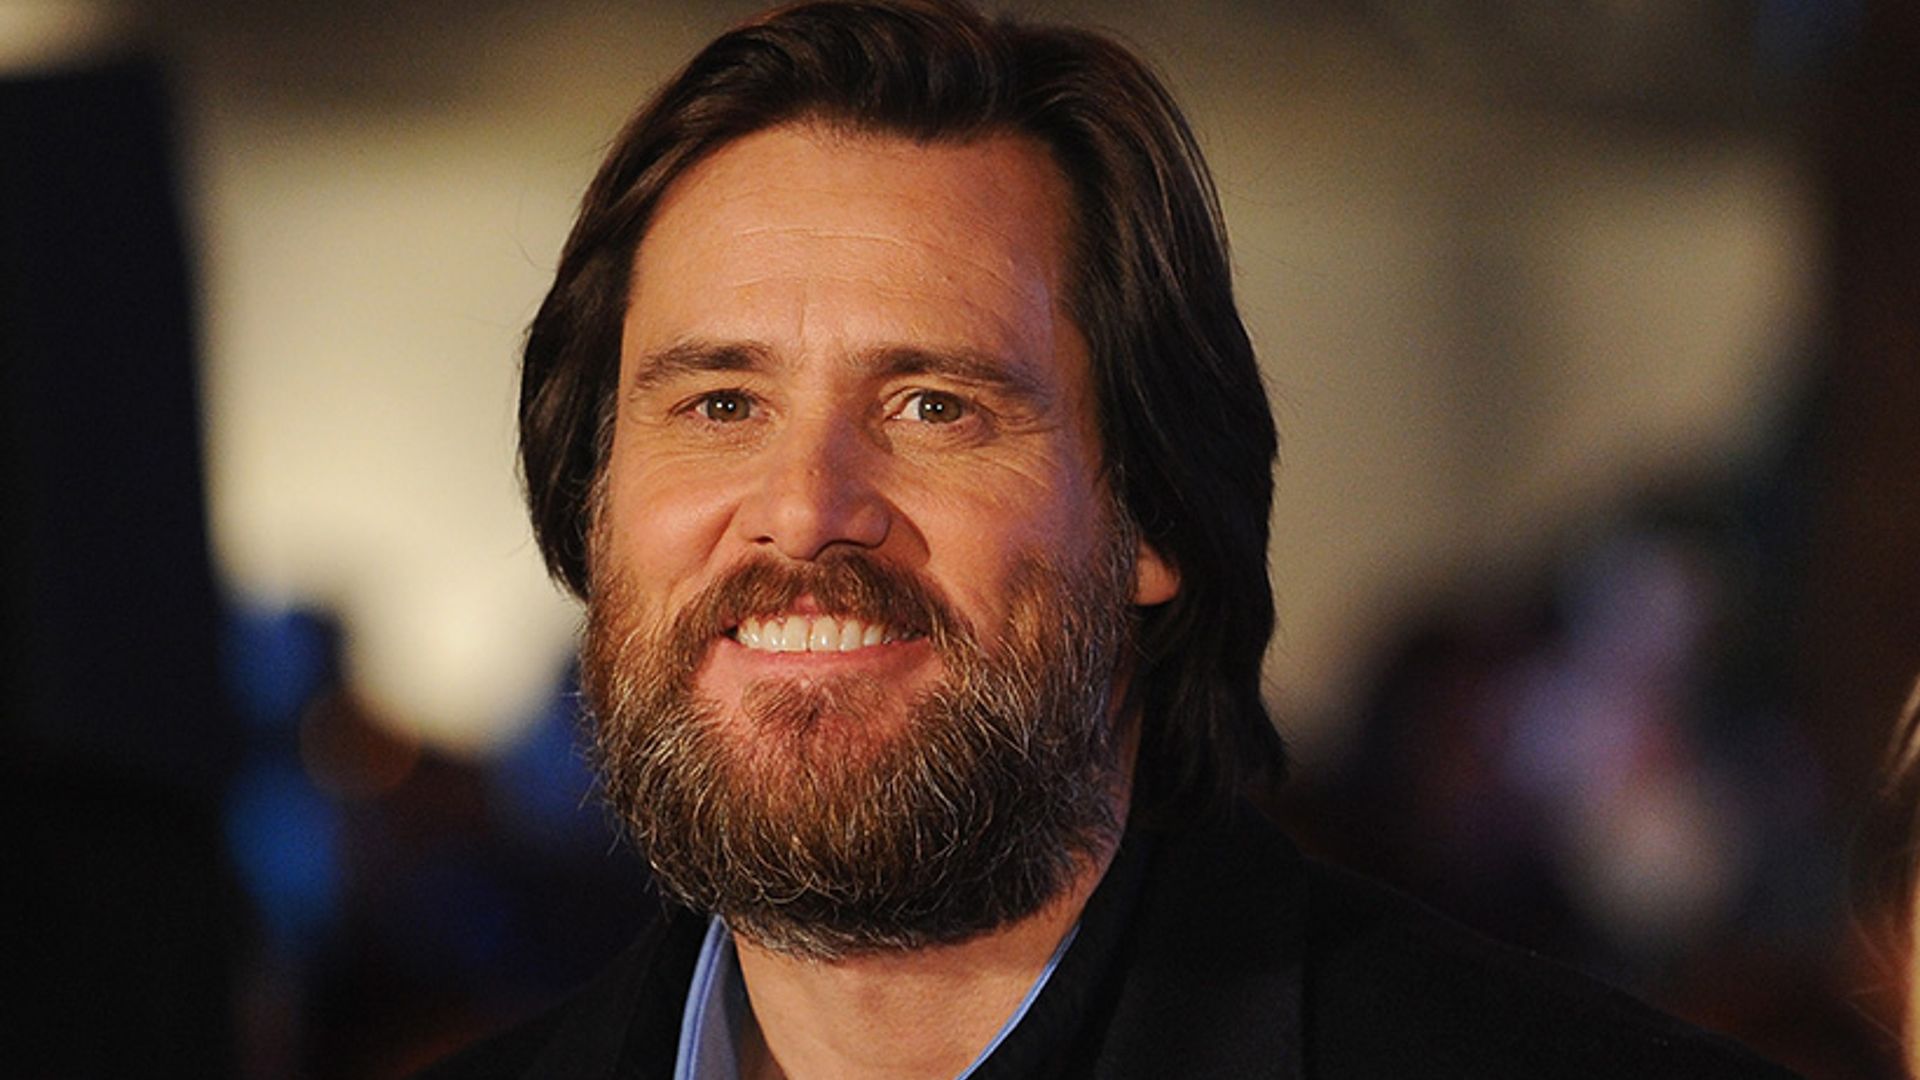 Jim Carrey could face trial over death of girlfriend Cathriona White